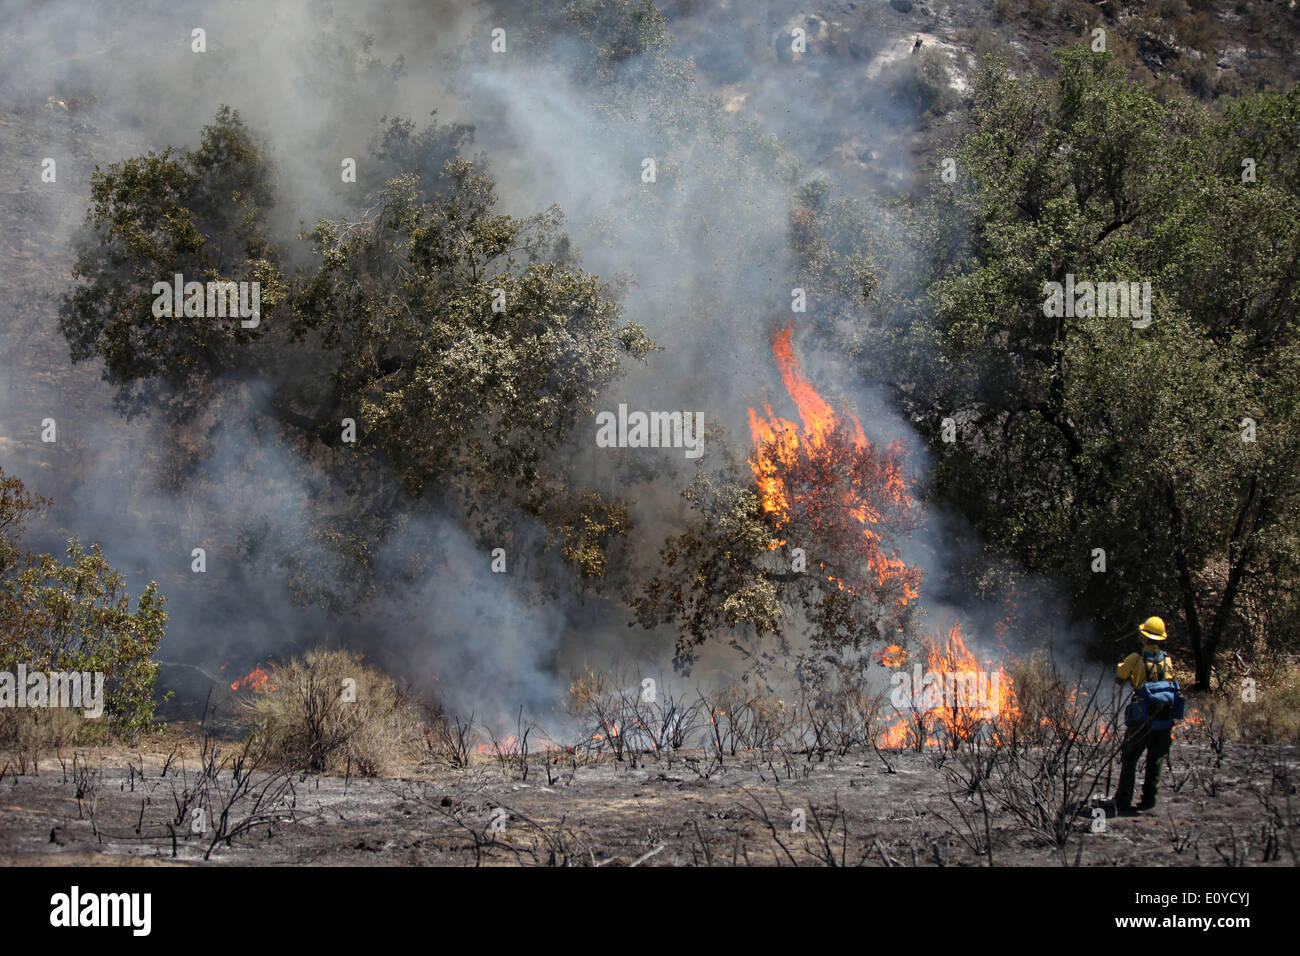 Calfire firefighters monitor the Tomahawk and Las Pulgas wildfires as they burn the foothills May 16, 2014 around Camp Pendleton, California. The Las Pulgas Wildfire in Camp Pendleton has burned more than 15,000 acres and is the largest fire in San Diego County history. Stock Photo